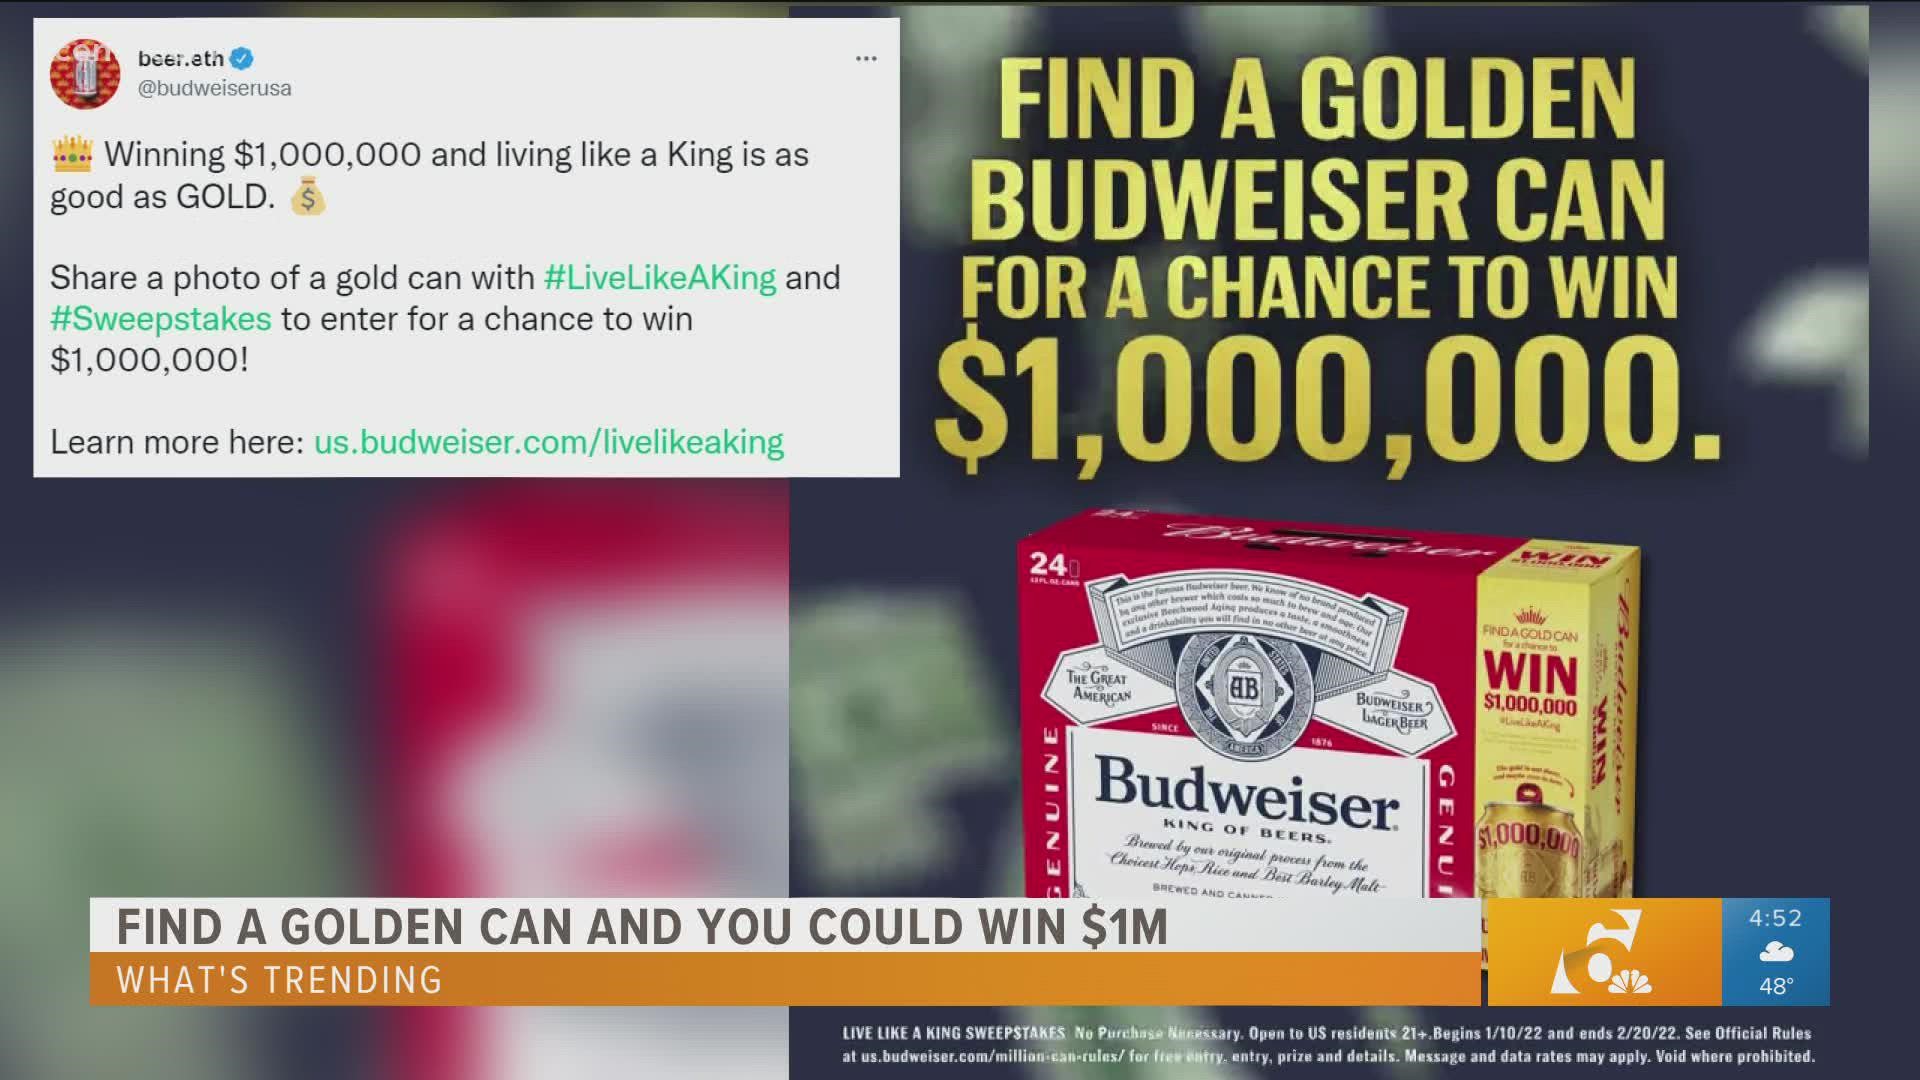 Finding a golden Budweiser could put you in the drawing for a million dollars!